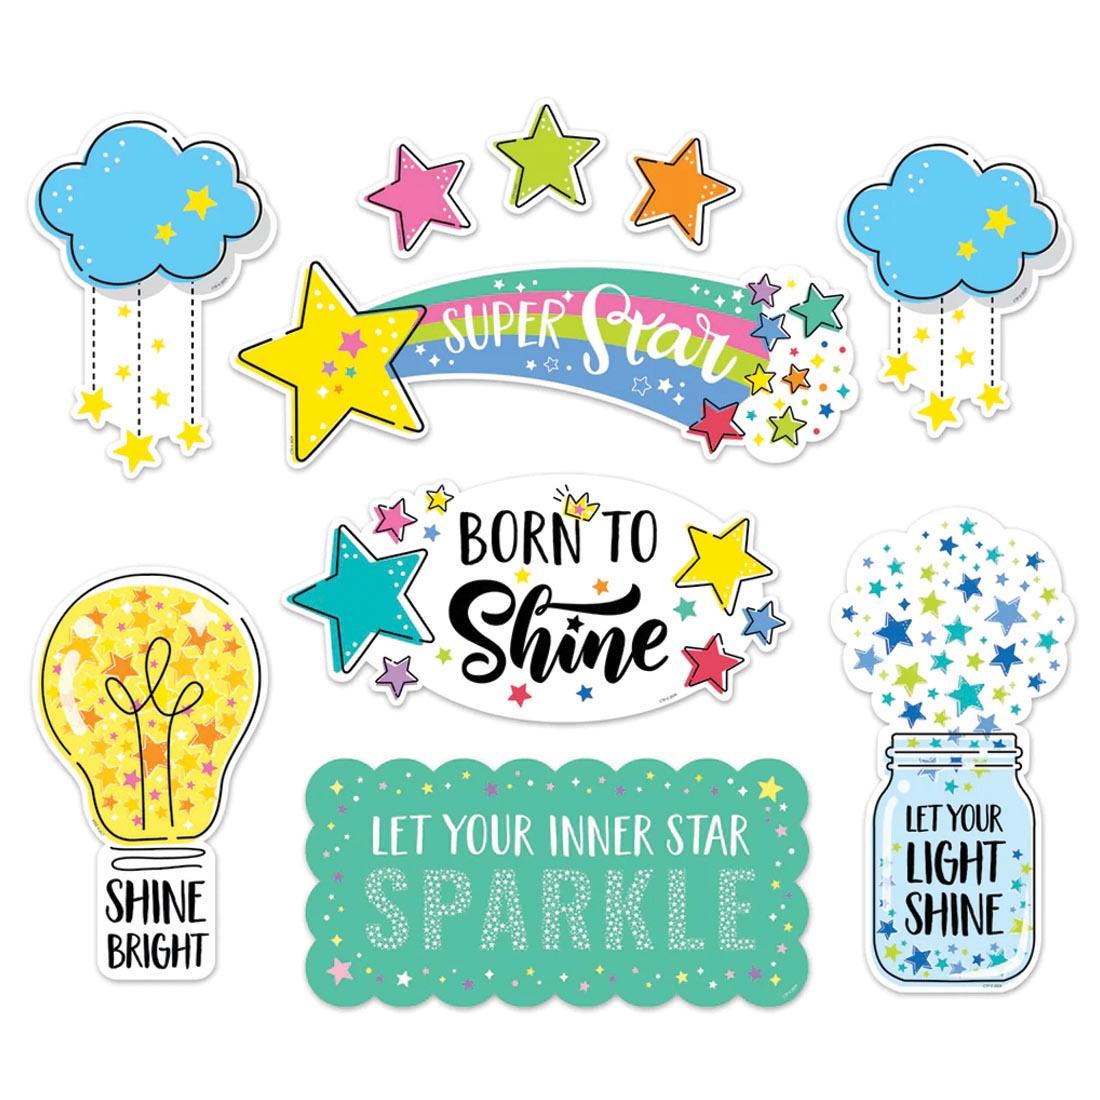 Positive Thinking Mini Bulletin Board Set from the Star Bright collection by Creative Teaching Press